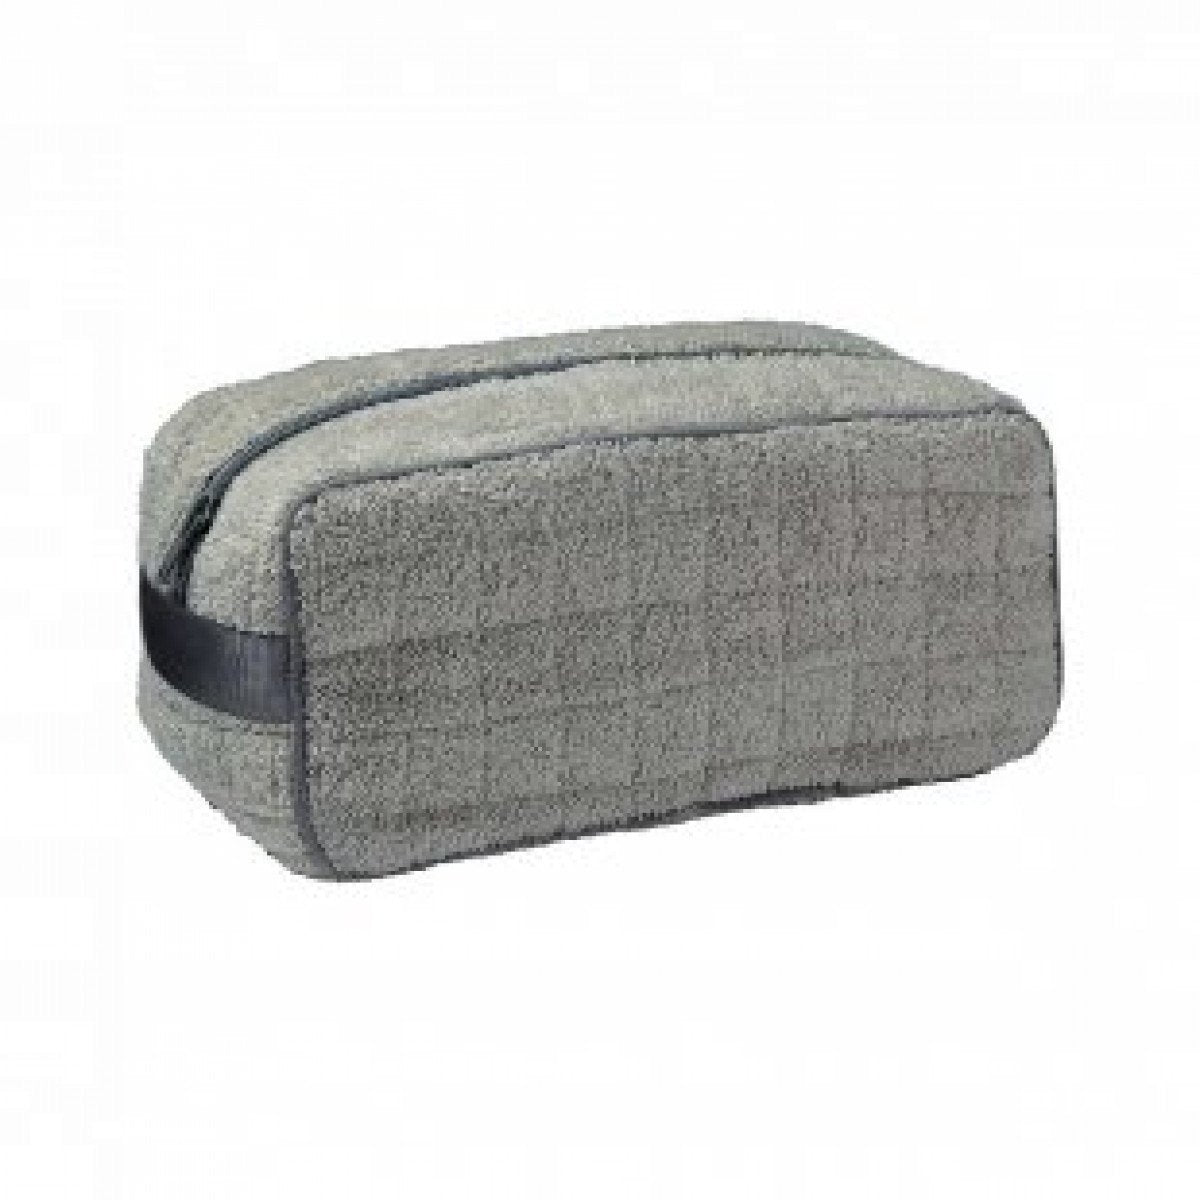 Etoile Platine Gray Men’s Toiletry Bag by Yves Delorme | Fig Linens